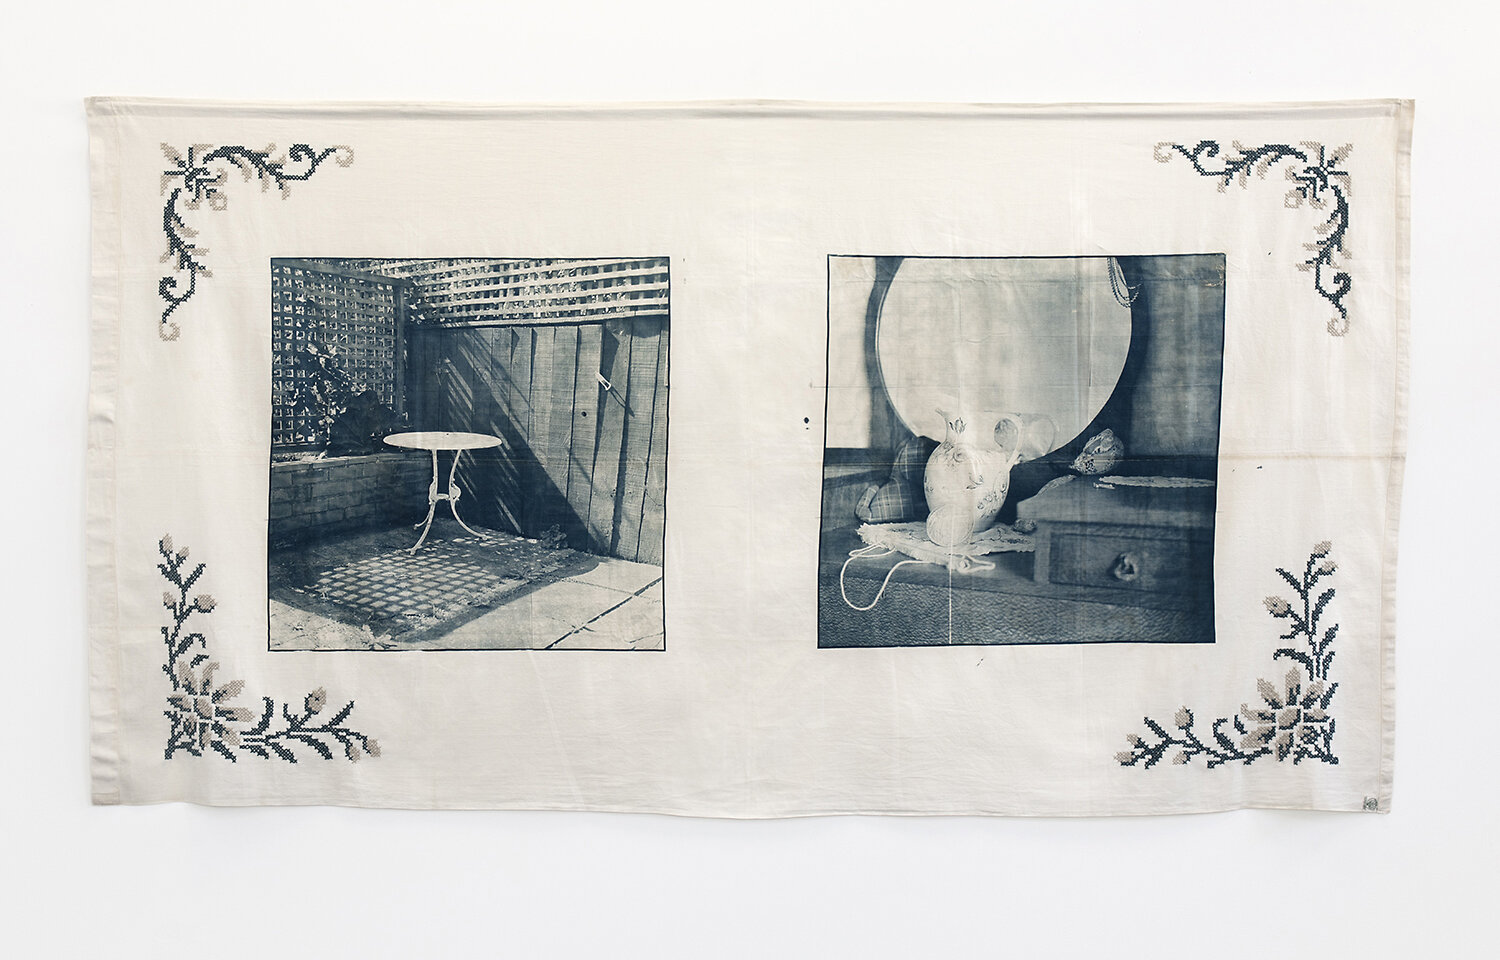  Caroline McQuarrie,  Reasons For Silence (i) , from the series  Reasons For Silence , cyanotype and wool embroidery on vintage cotton bed sheet, 2010. Courtesy the artist. 